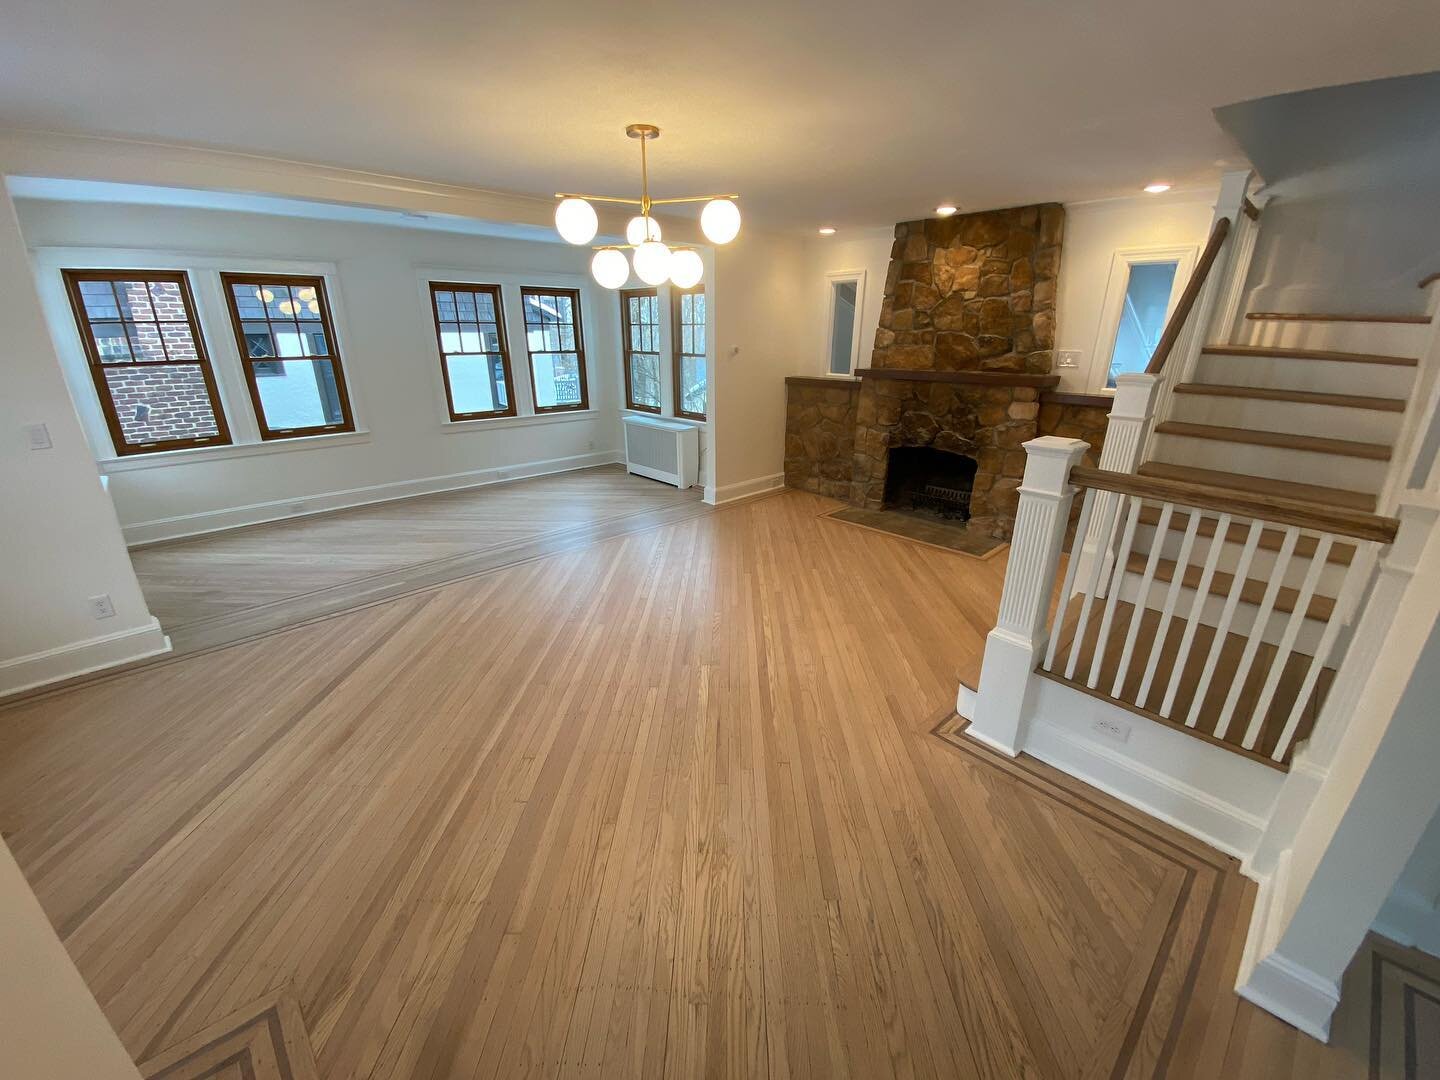 A Cosmetic Renovation / Restoration of a Cape Cod Styled Home on Staten Island, NY.  Work included floor refinishing, lighting upgrades, wallpaper removal, skim coating, painting and smart home lighting upgrades by Lutron. 

#renovation #nycrenovatio